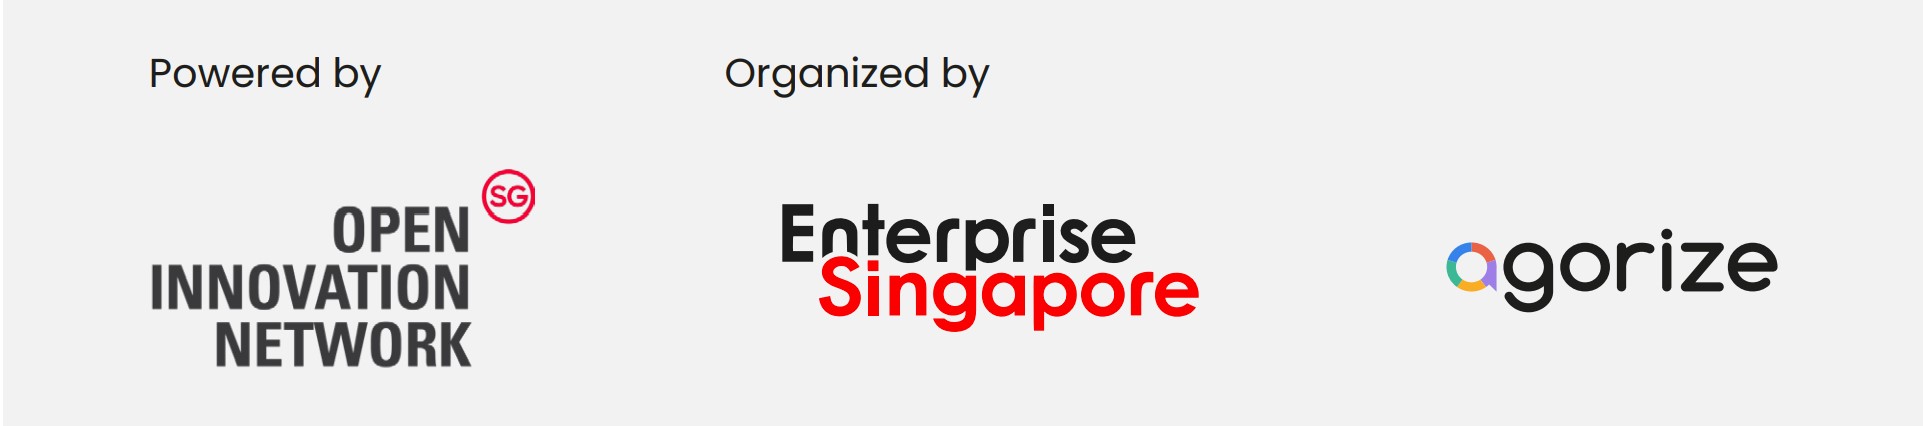 Accelerate Innovation to Build a Sustainable Singapore